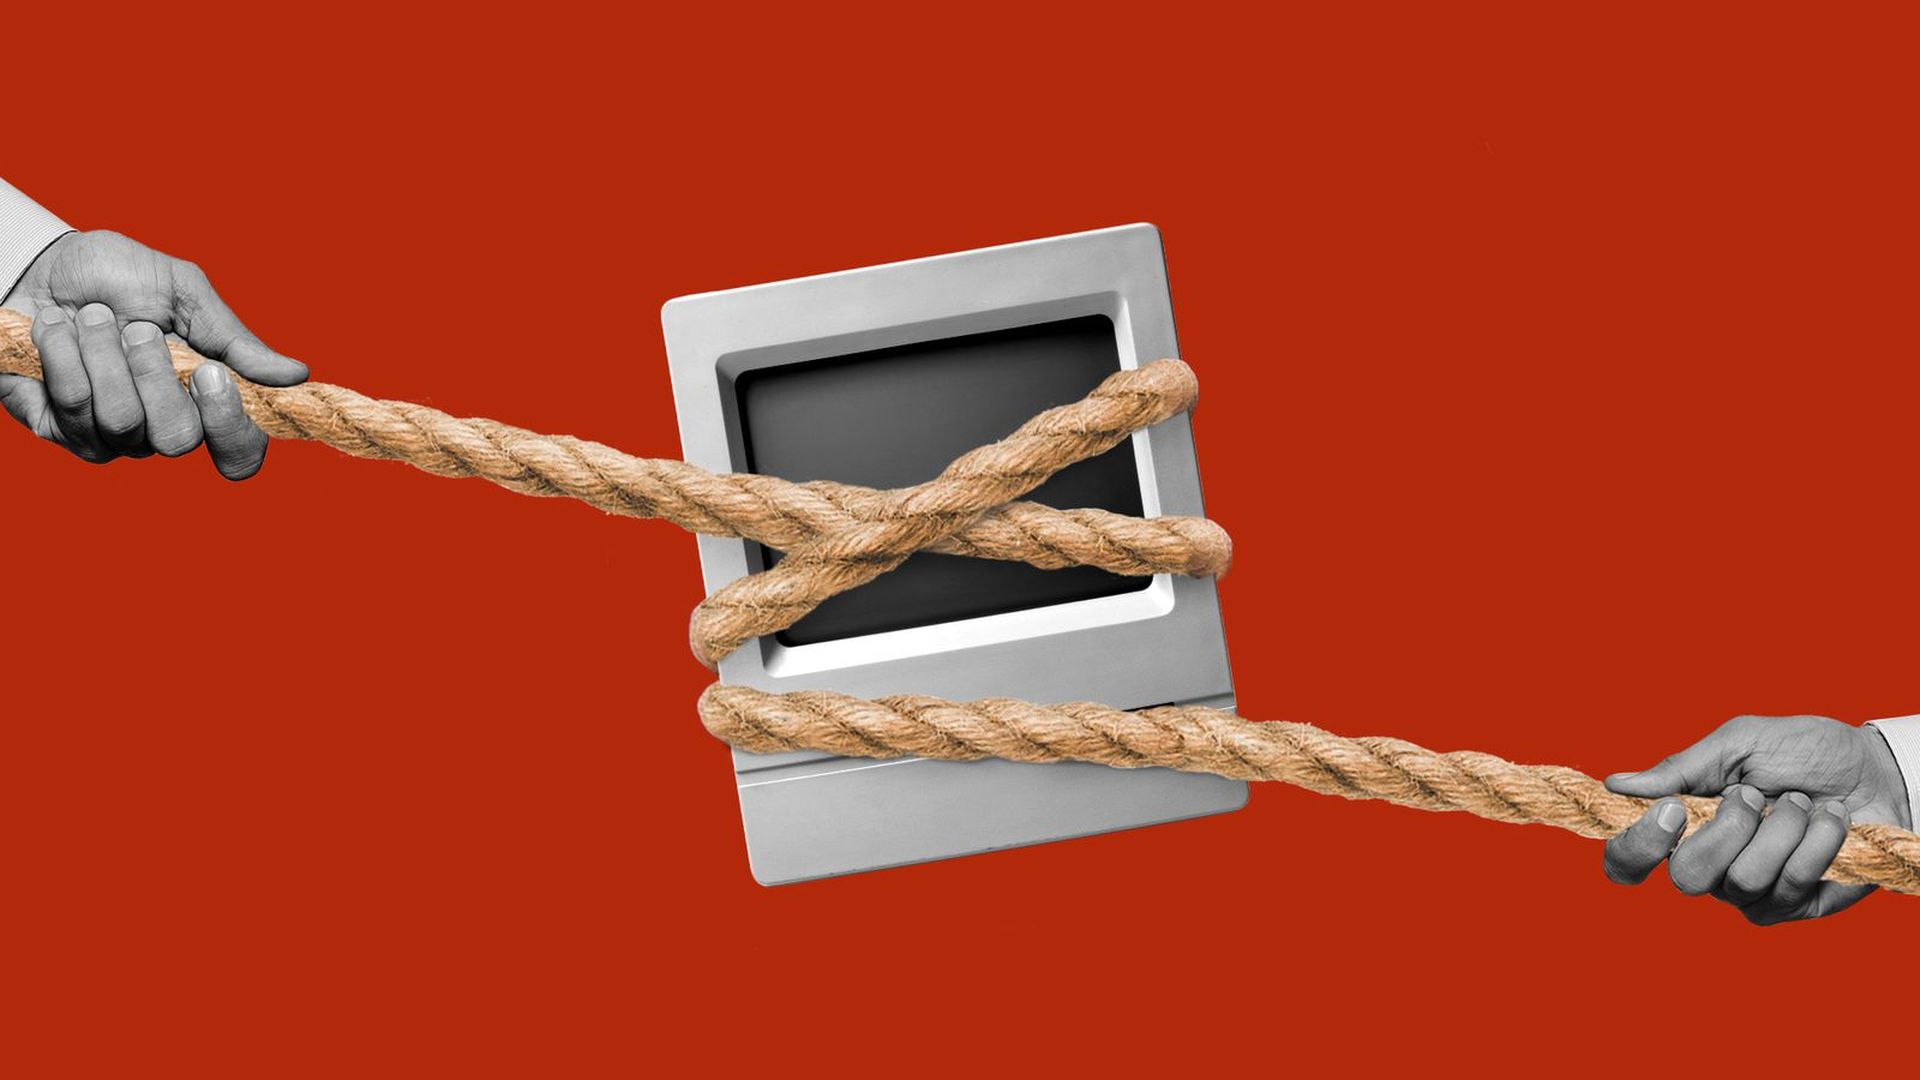 Illustration of a rope around a computer with two people in a tug-of-war